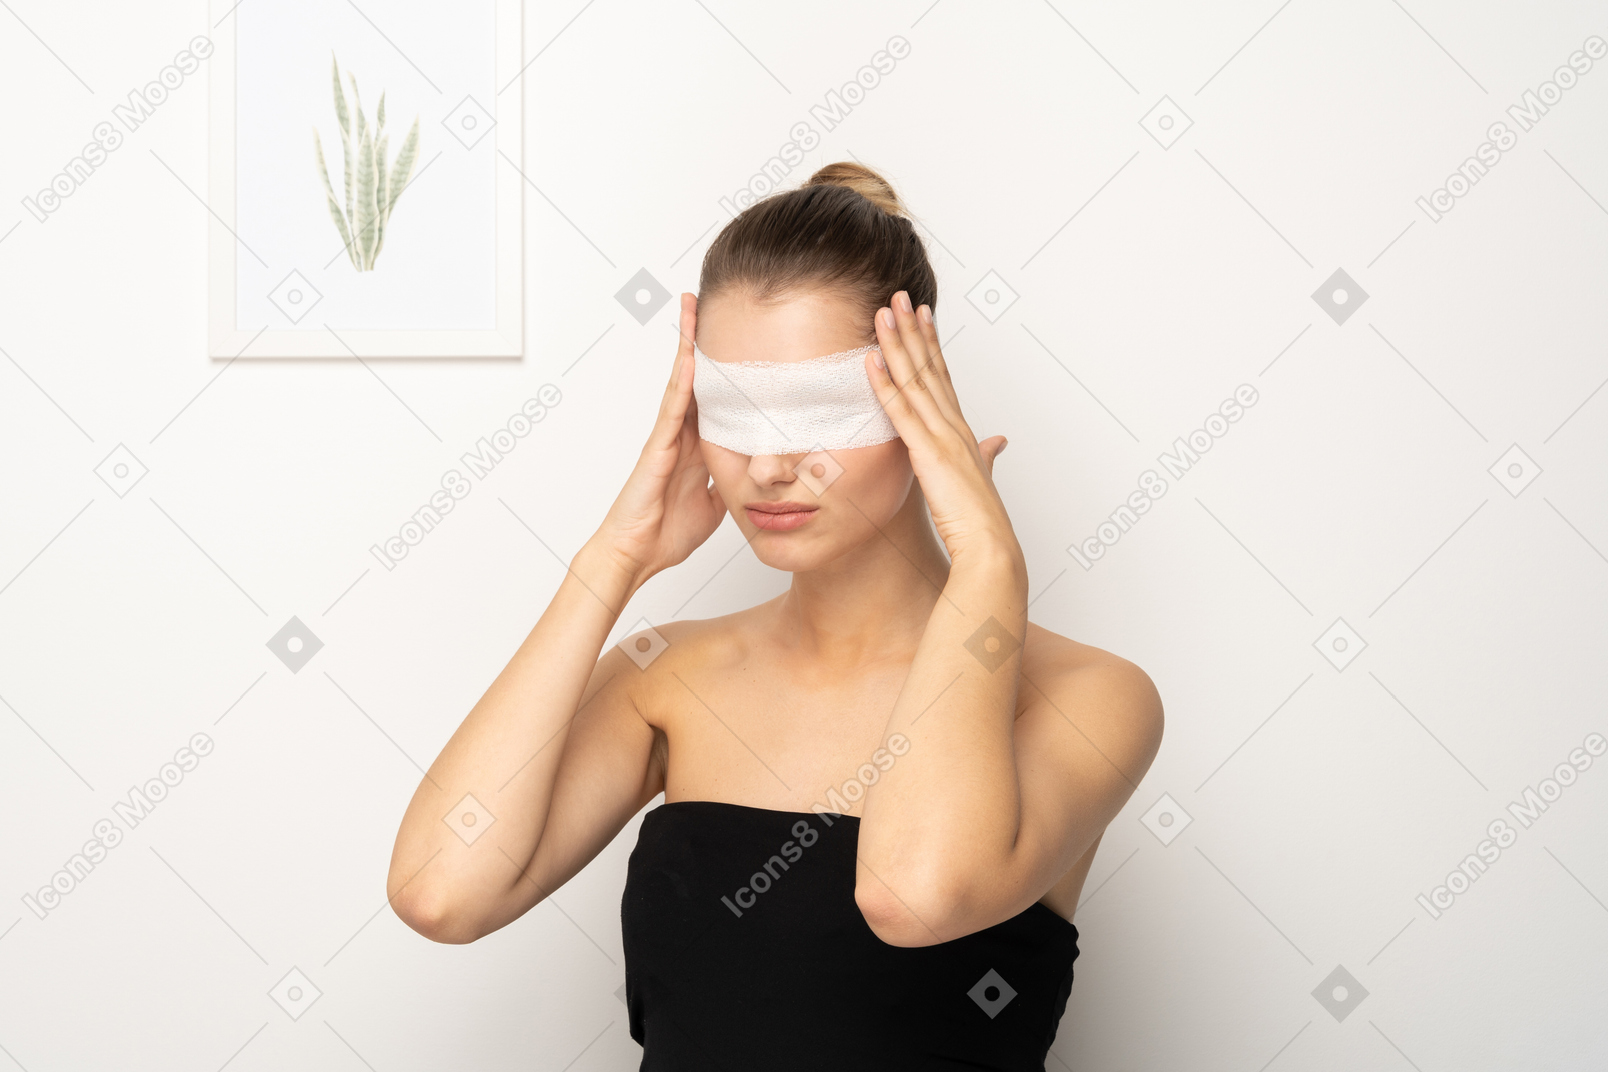 Young woman with bandage over her eyes touching temples